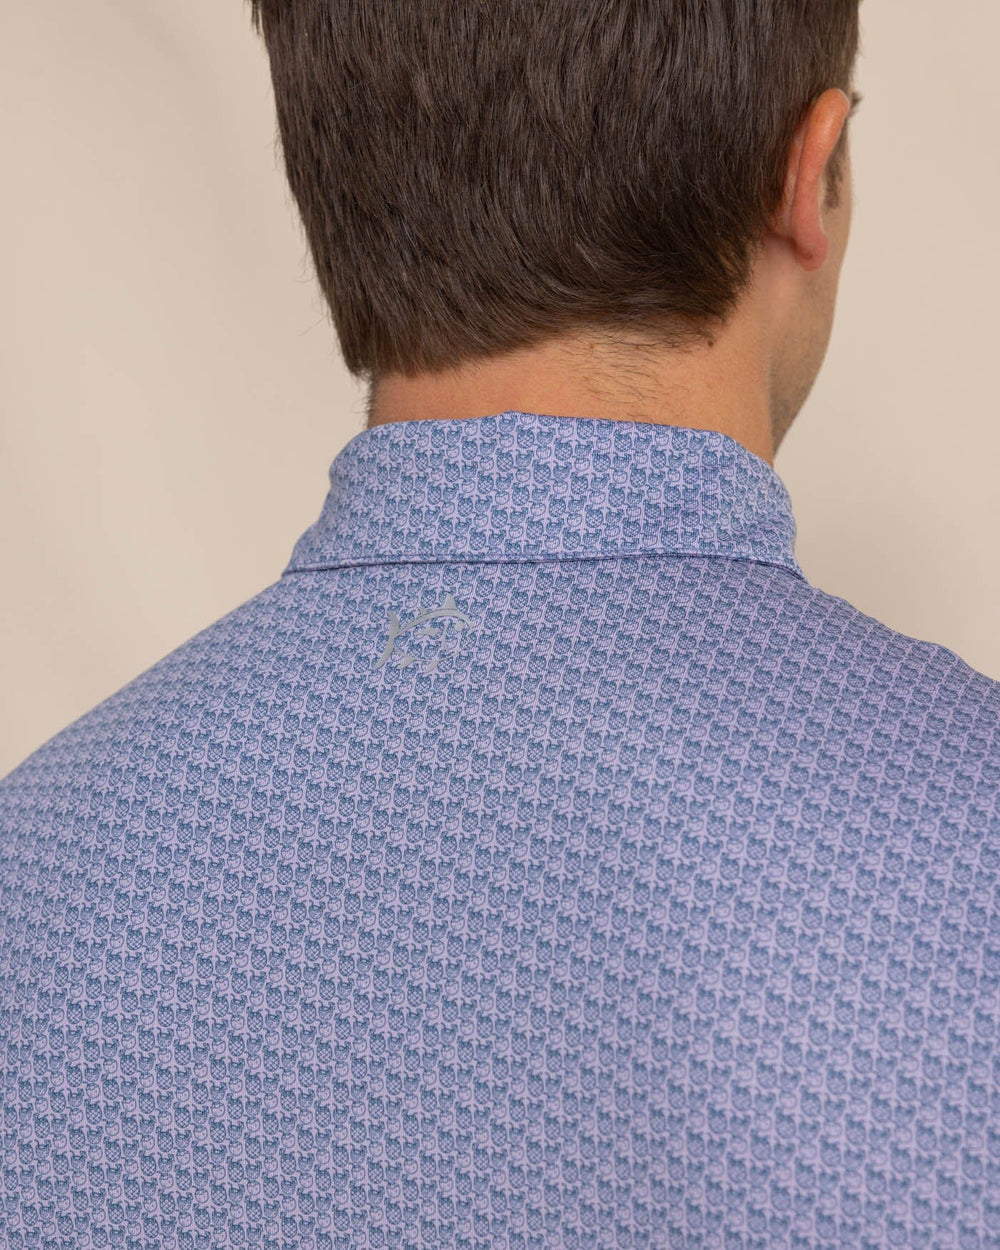 The detail view of the Southern Tide Driver Vacation Views Printed Polo by Southern Tide - Wisteria Purple